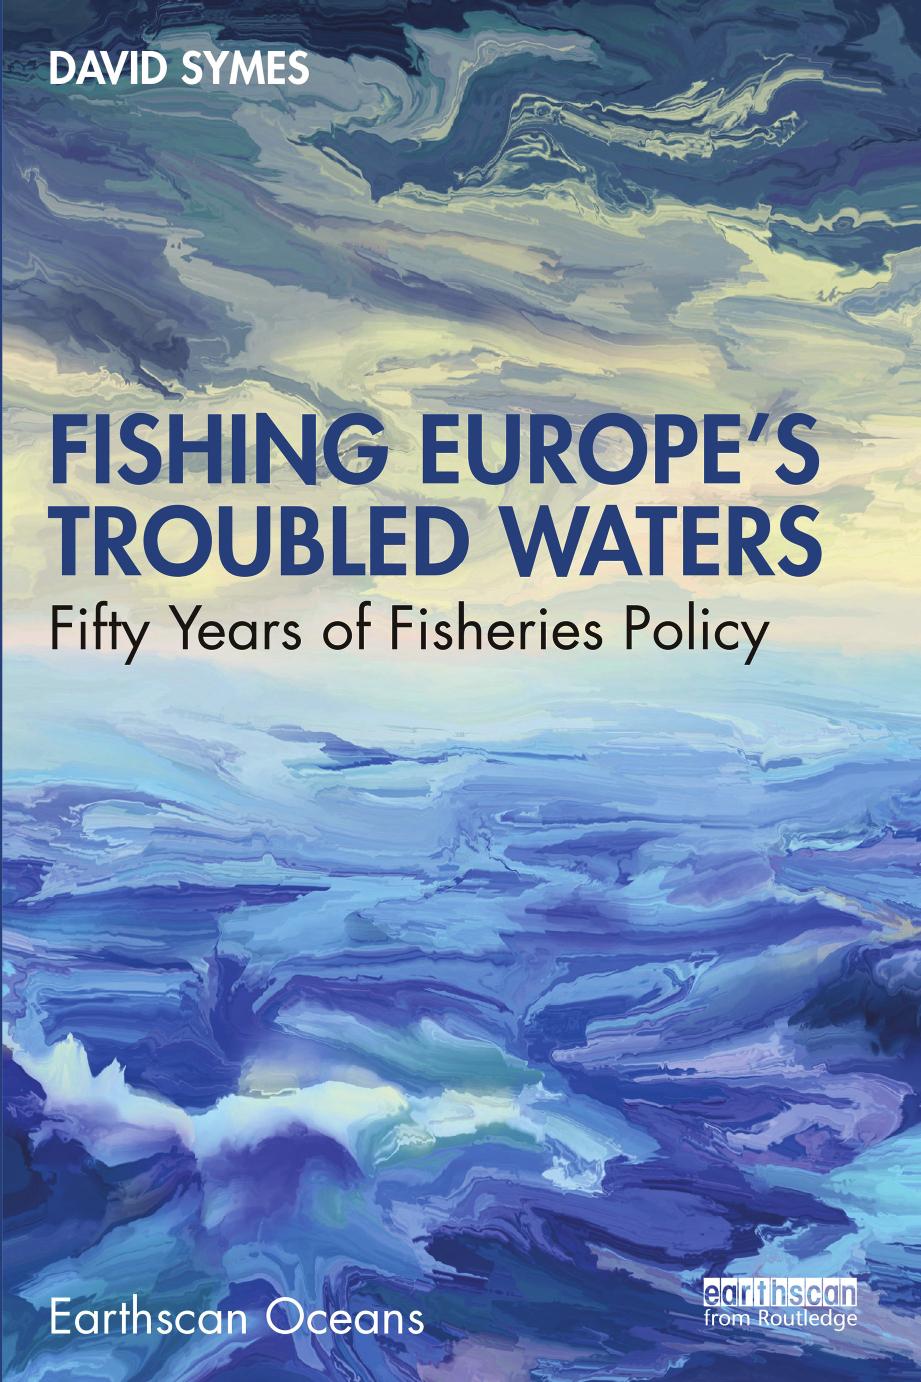 Fishing Europe's Troubled Waters: Fifty Years of Fisheries Policy by David Symes